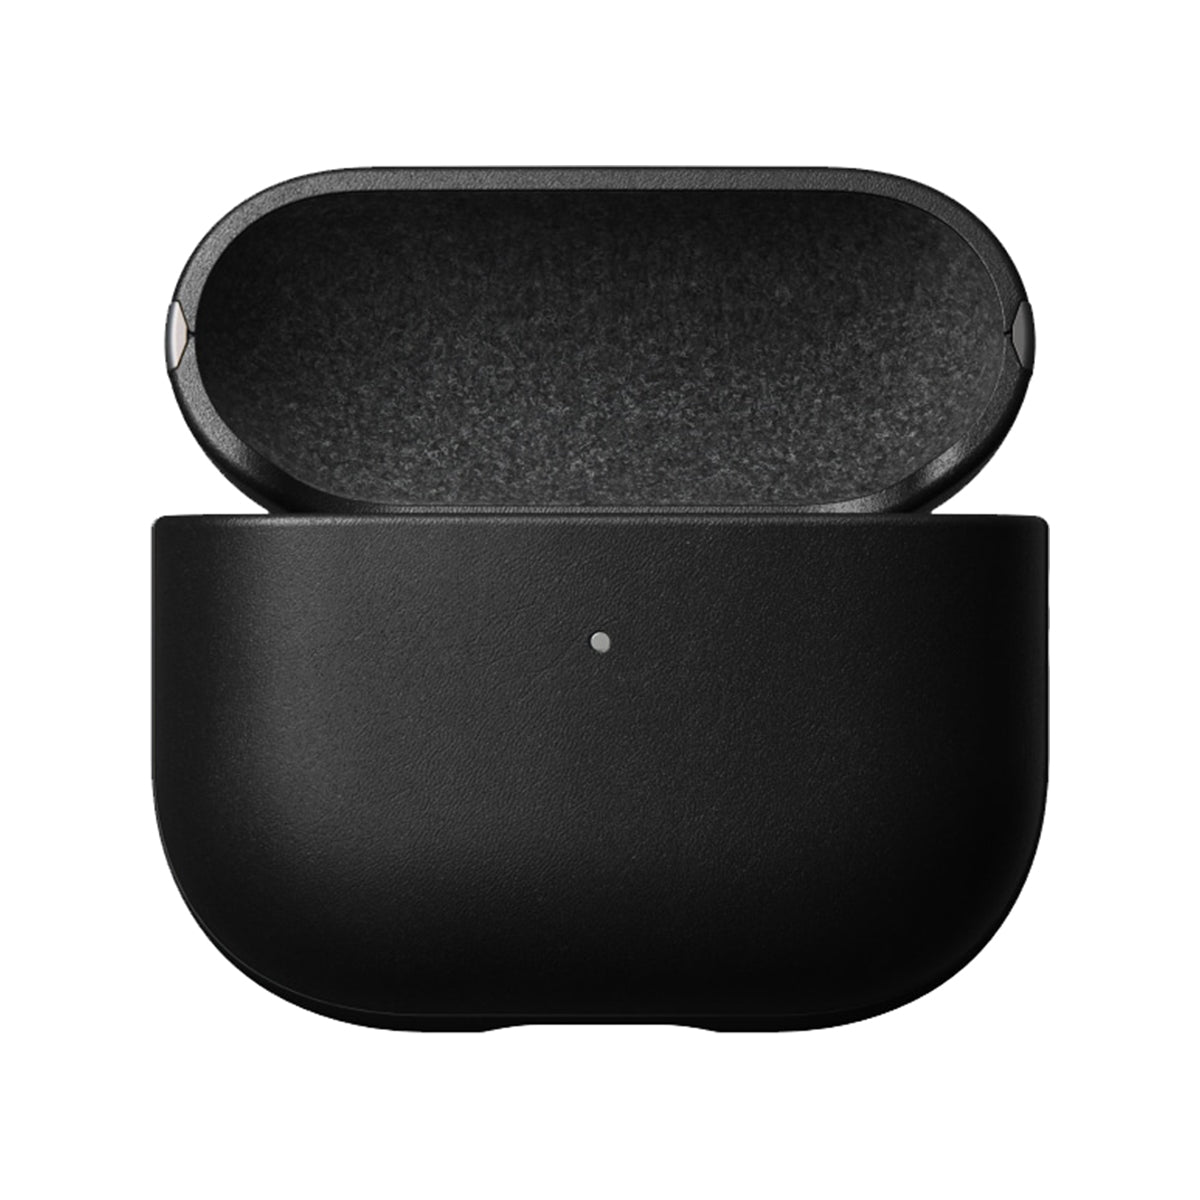 NOMAD Modern Leather Case for Apple AirPods 3rd Gen - Black Horween Leather.